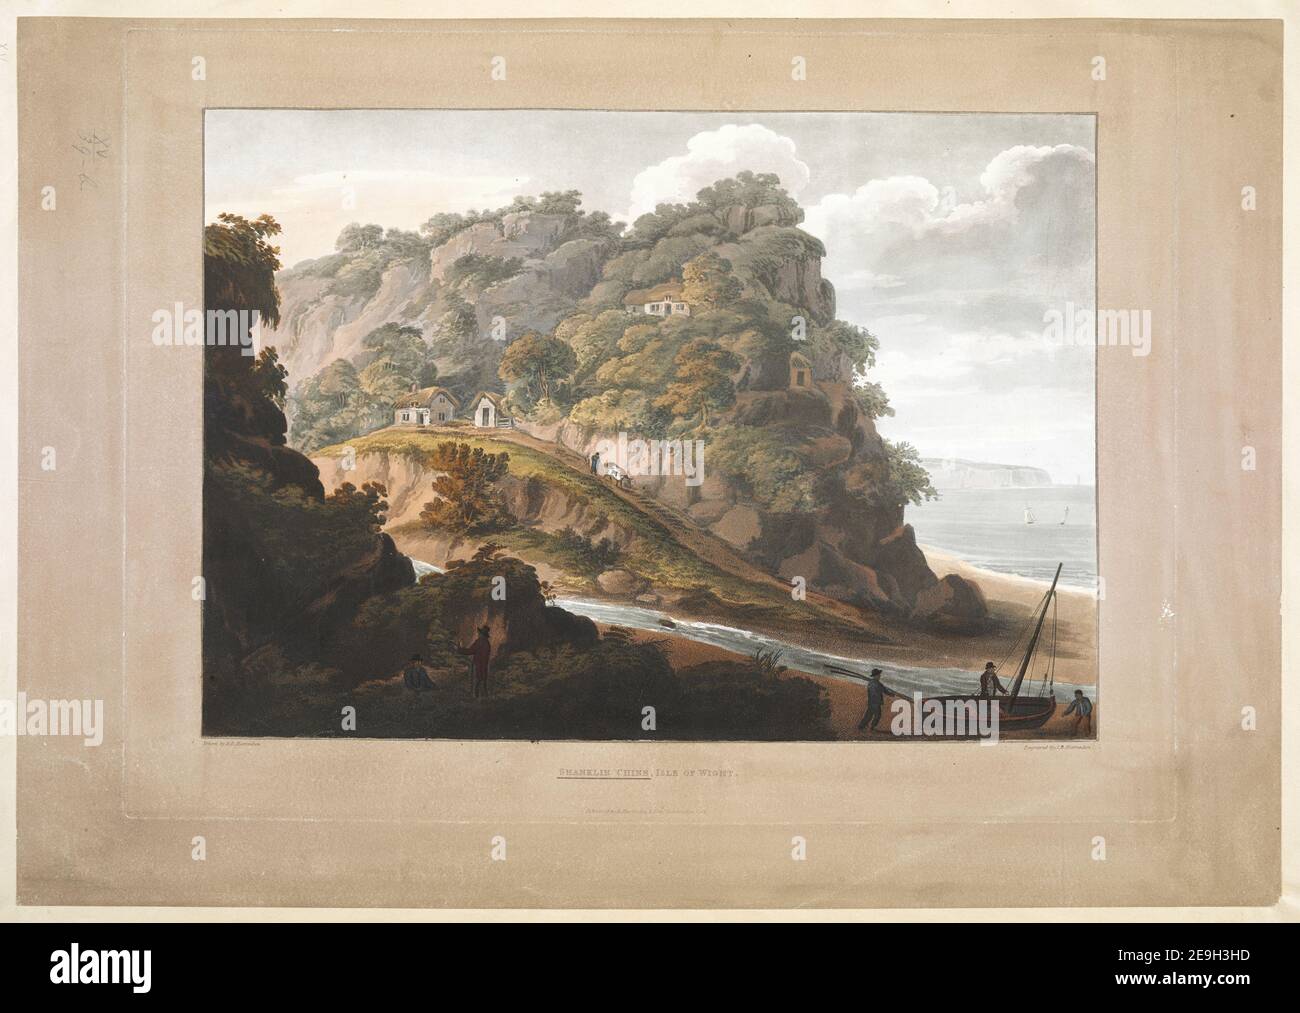 SHANKLIN CHINE, ISLE OF WIGHT.  Author  Harraden, J. B. 15.39.b. Place of publication: [Cambridge] Publisher: Published R. Harraden and Son, Cambridge, Date of publication: 1814.  Item type: 1 print Medium: aquatint and etching with hand-colouring Dimensions: platemark 37.9 x 50.6 cm, on sheet 42.5 x 60.9 cn  Former owner: George III, King of Great Britain, 1738-1820 Stock Photo